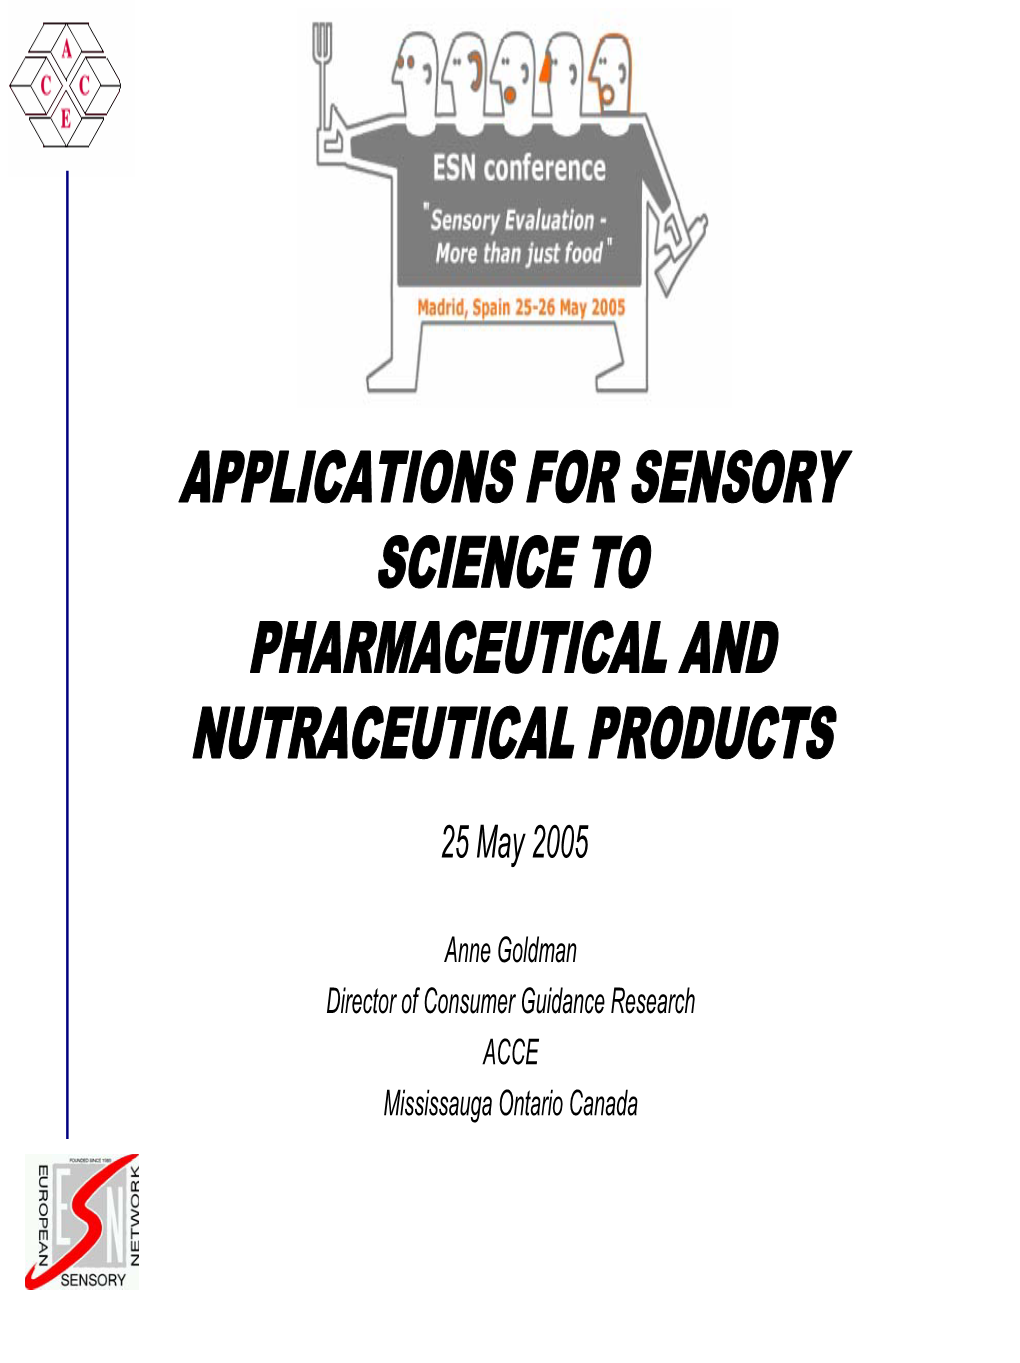 Applications for Sensory Science to Pharmaceutical